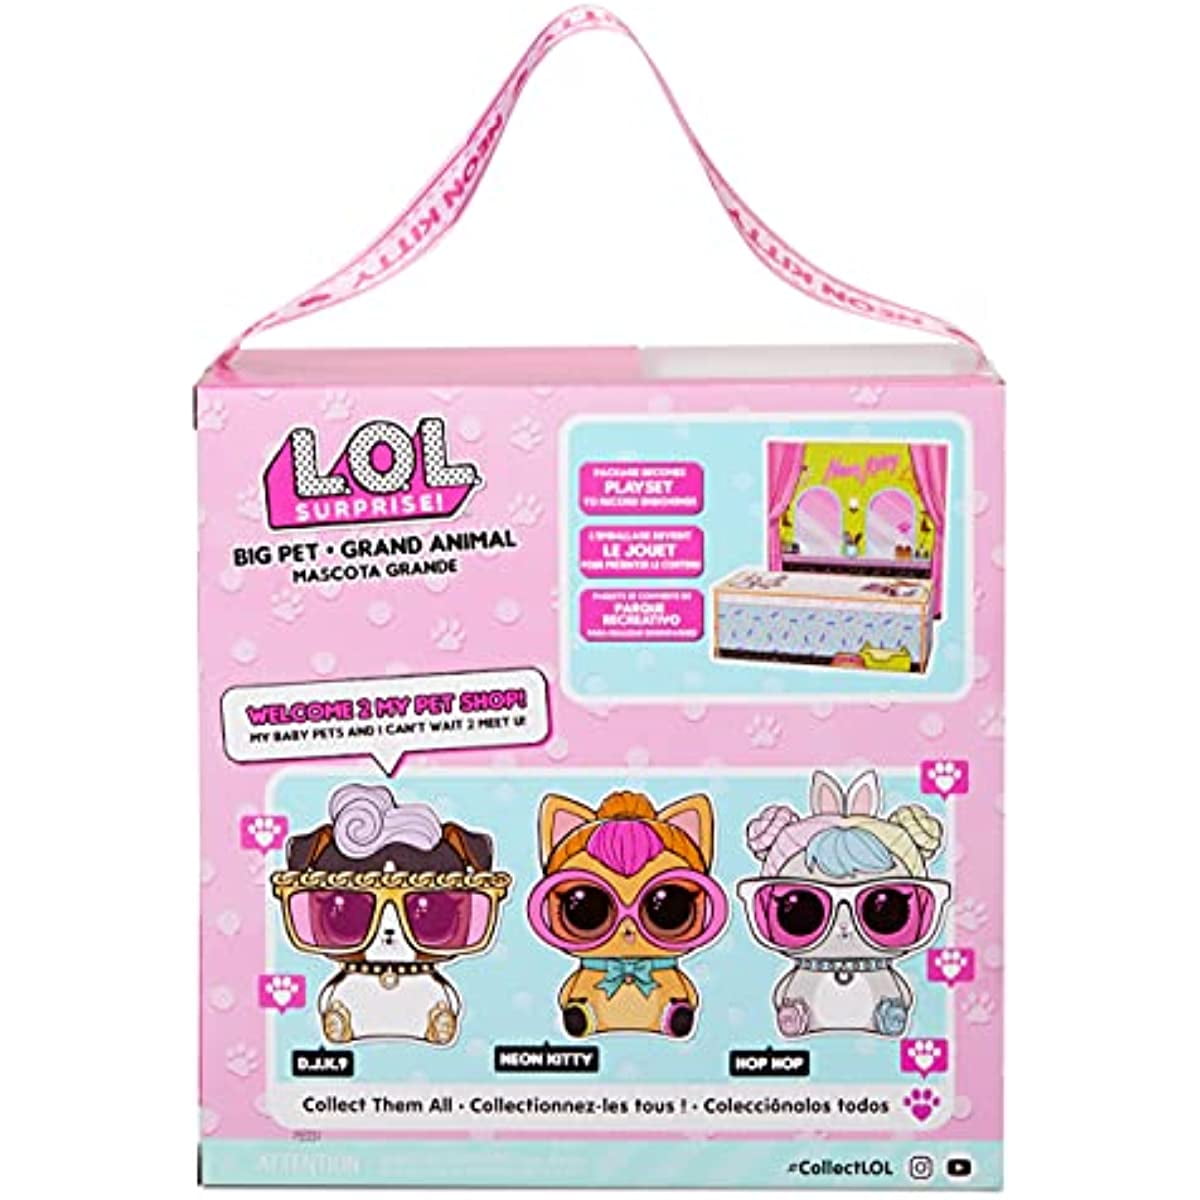  LOL Surprise Big Pet DJ K.9. with 15 Surprises Including Wear  and Share Glasses & Necklace, 2 Pet Babies, Accessories, Backpack or Piggy  Bank, Gifts for Kids and Toys for Girls